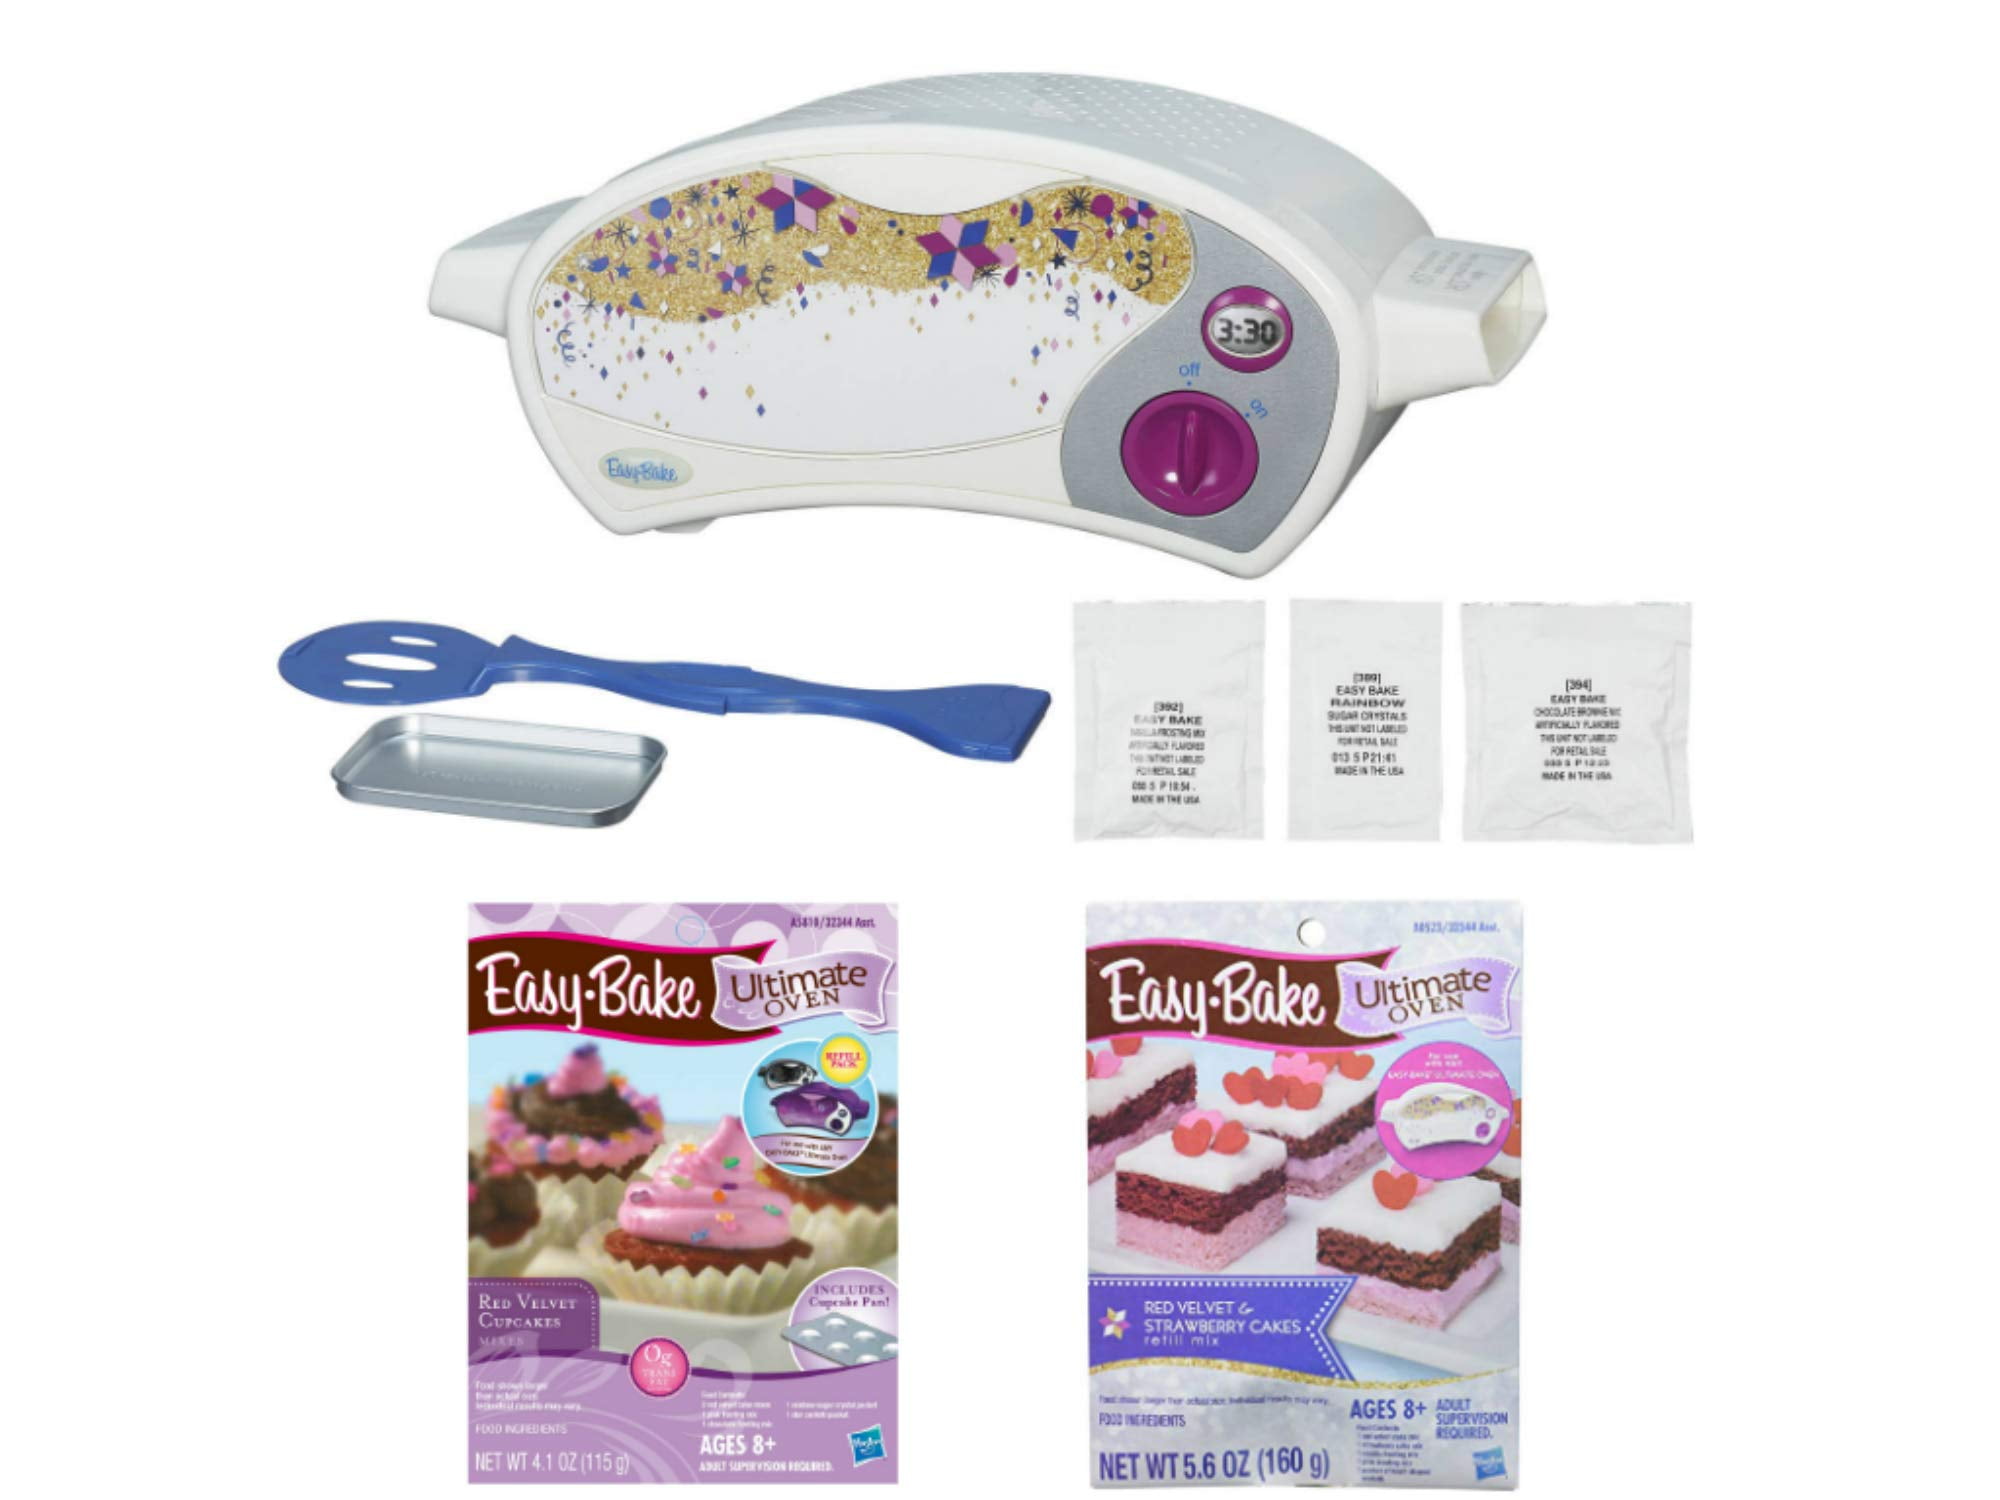 Kids Baking Fun Easy Bake Oven Ultimate Star Edition + Red Velvet Cupcakes Refill + Chocolate Chip and Pink Sugar Cookies 13XLFSS